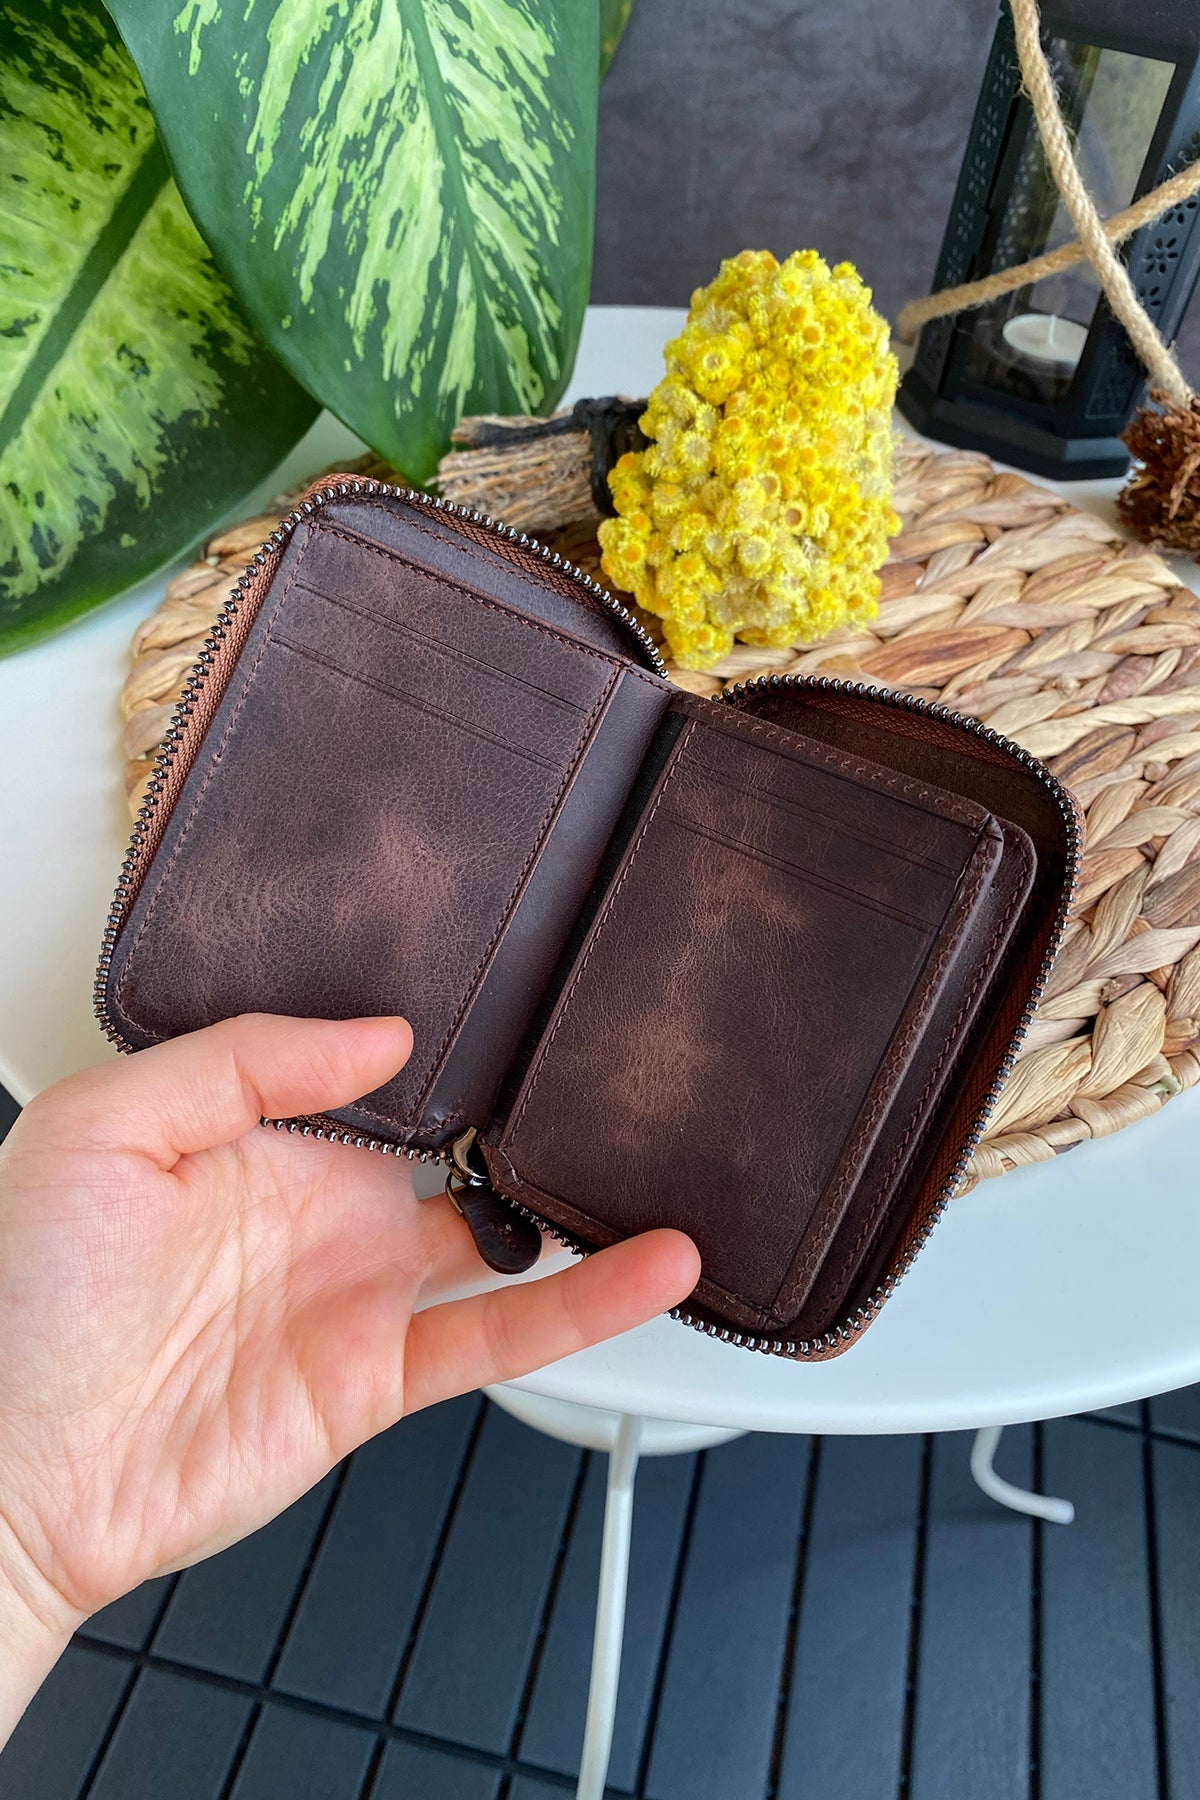 Porto - Genuine Leather Wallet with Zipper Feature